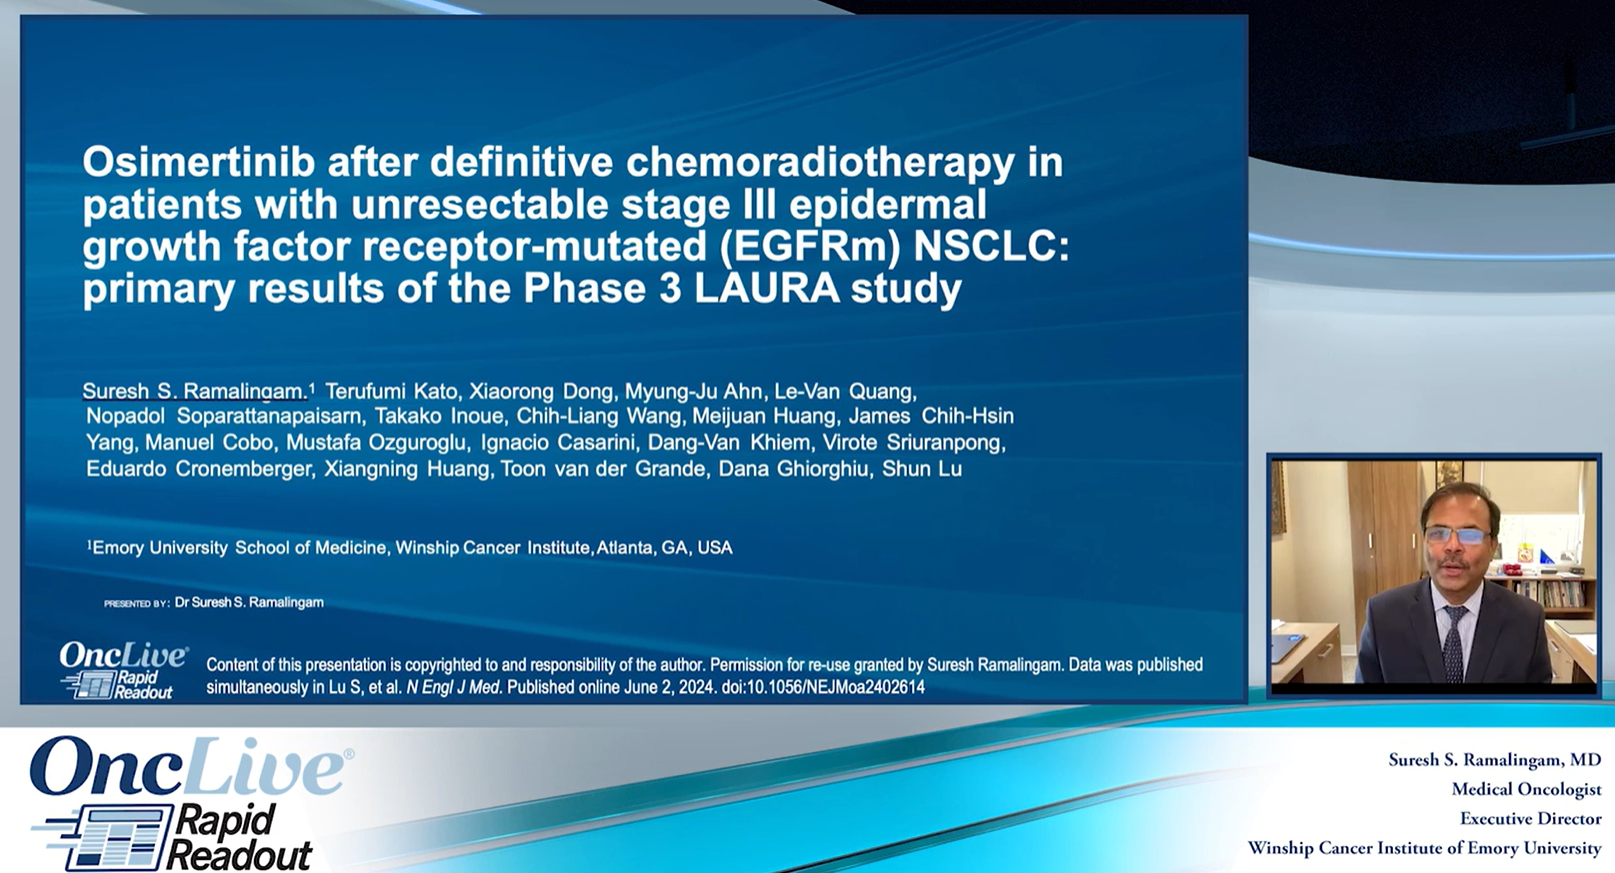 Osimertinib (osi) after definitive chemoradiotherapy (CRT) in patients (pts) with unresectable stage (stg) III epidermal growth factor receptor-mutated (EGFRm) NSCLC: Primary results of the phase 3 LAURA study